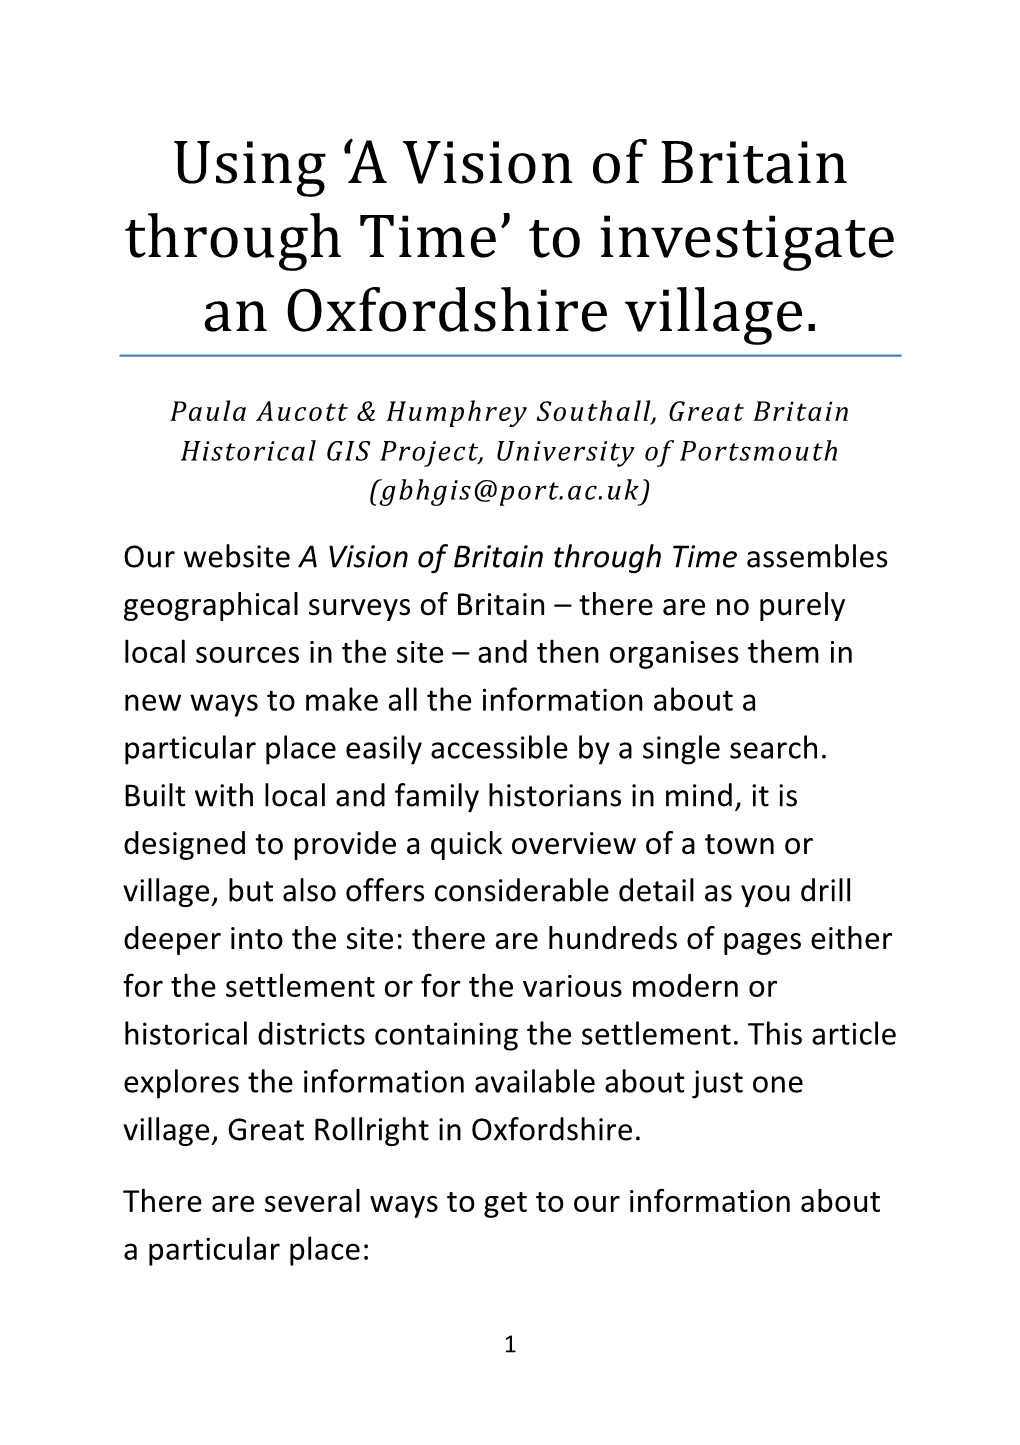 Oxfordshire FHS Article Revised